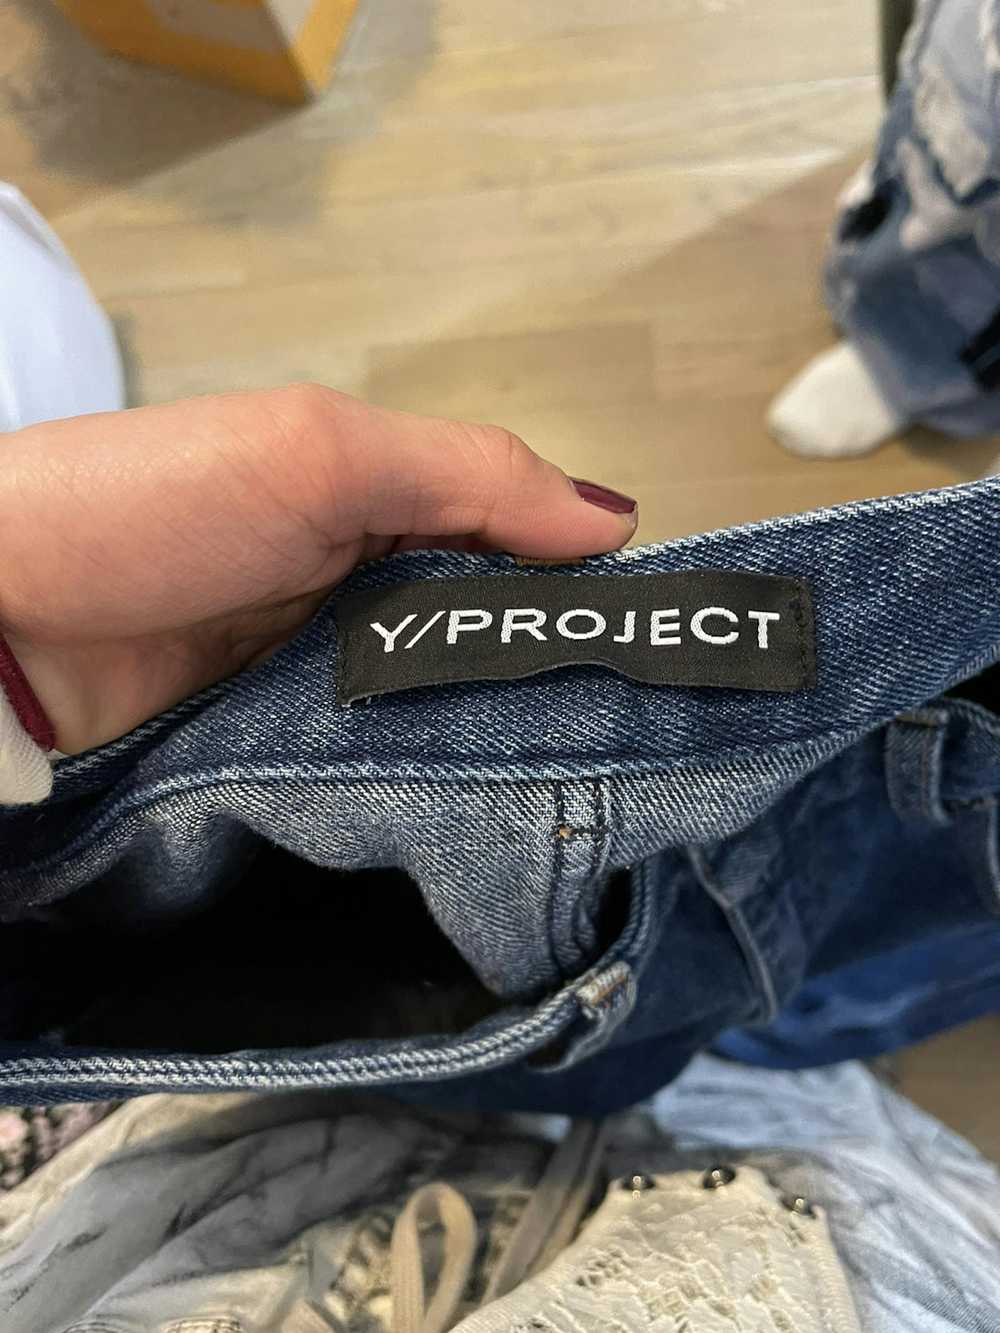 Y/Project Y project wired denim long pants - image 6